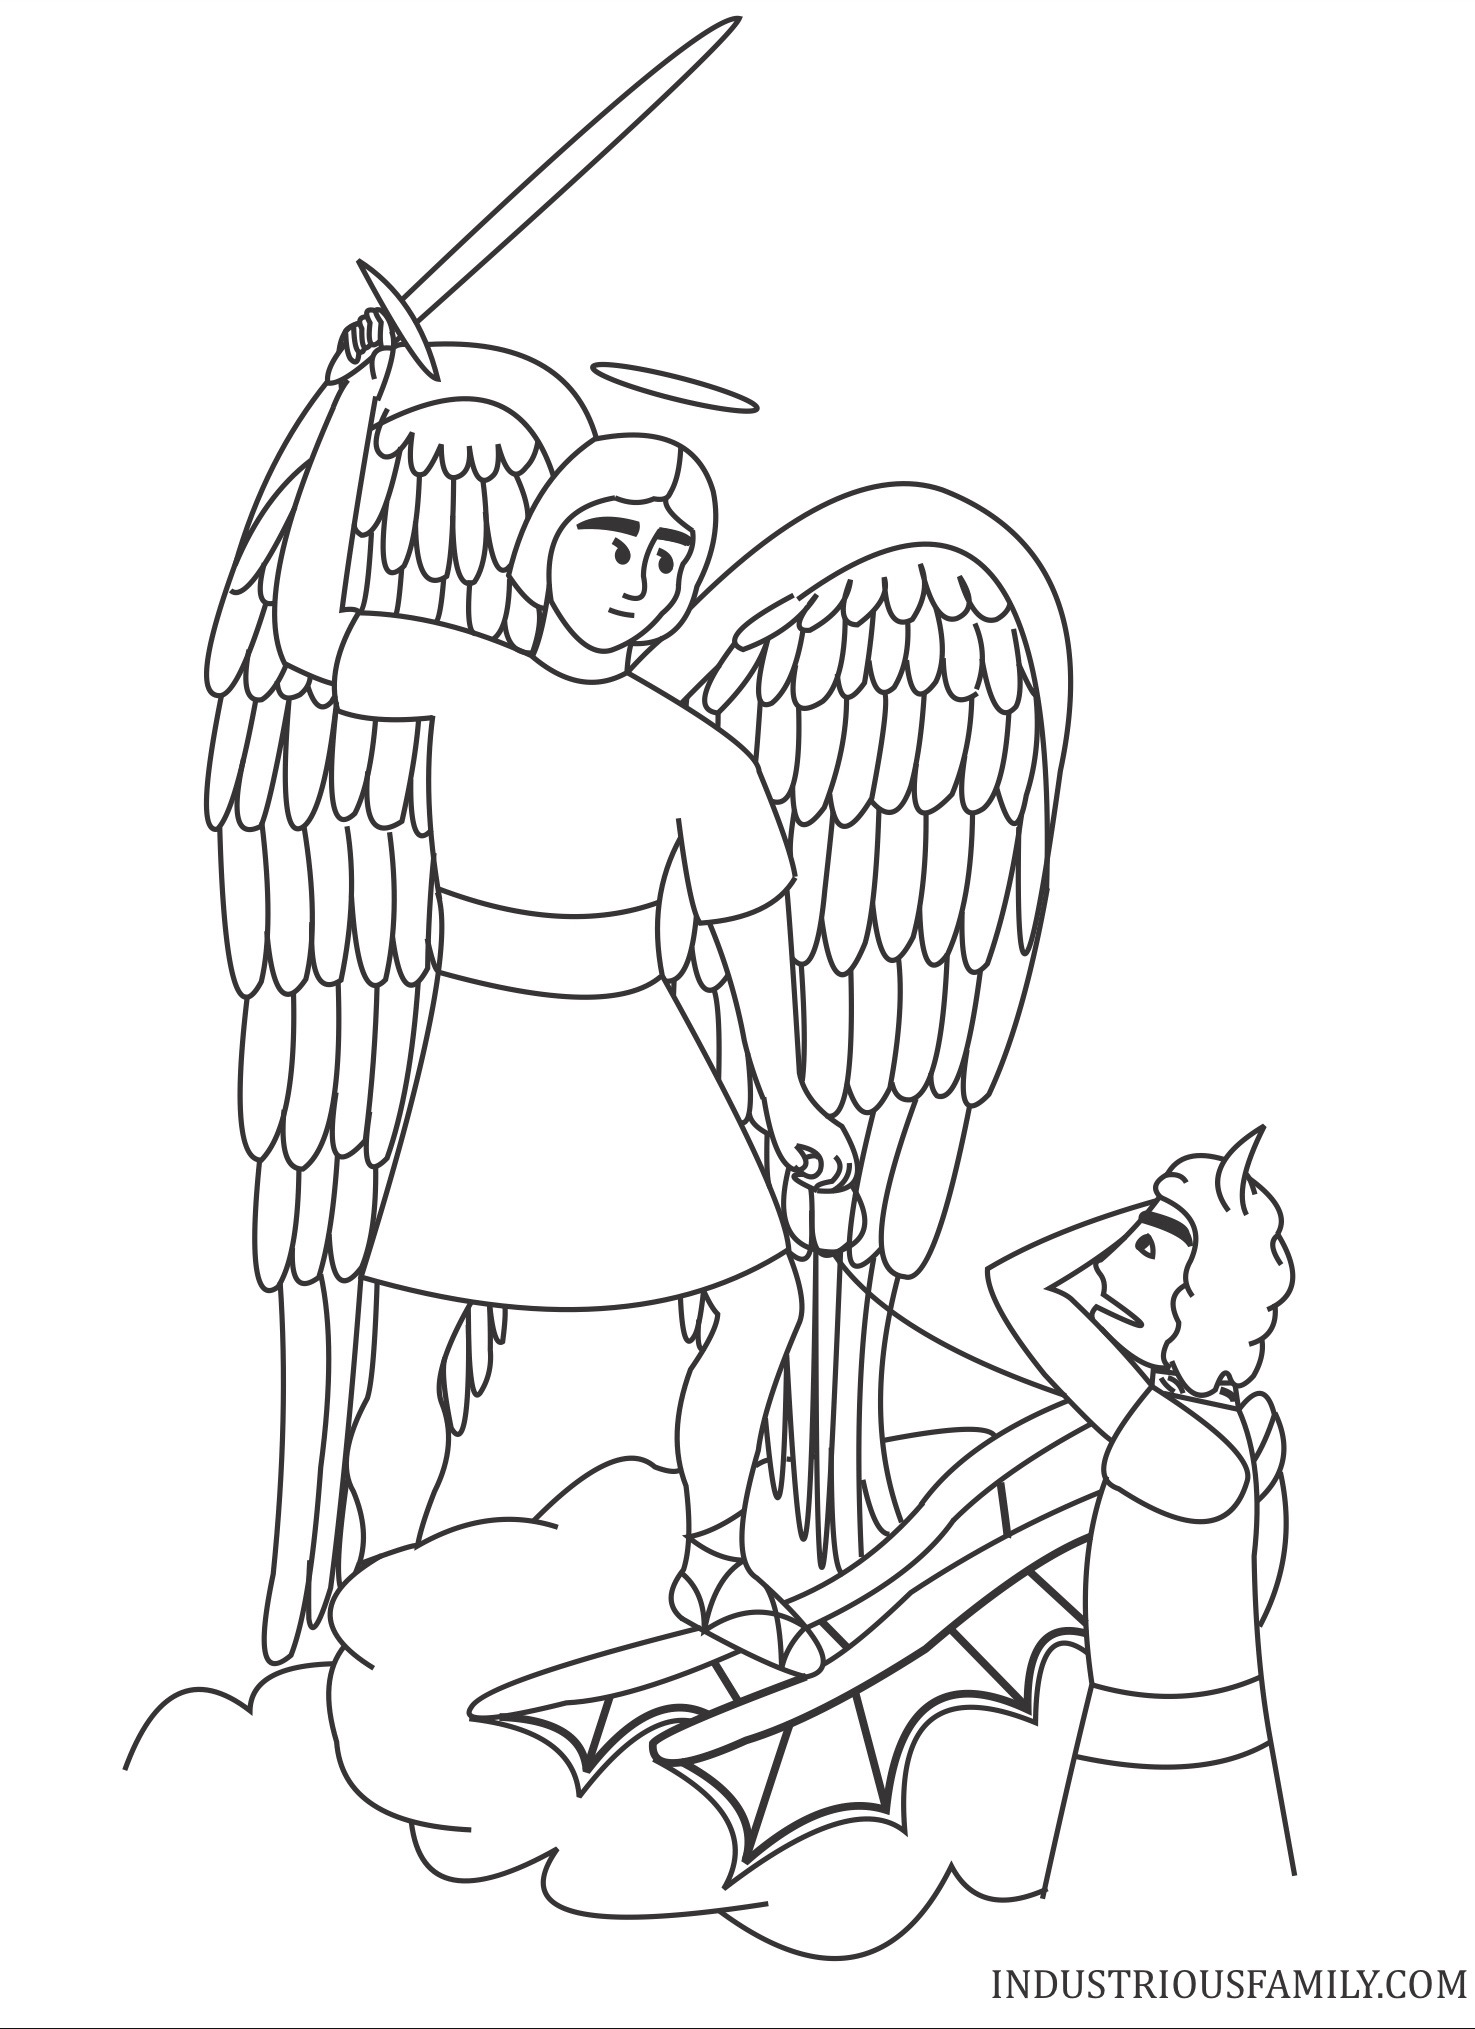 free-coloring-pages-for-catholics